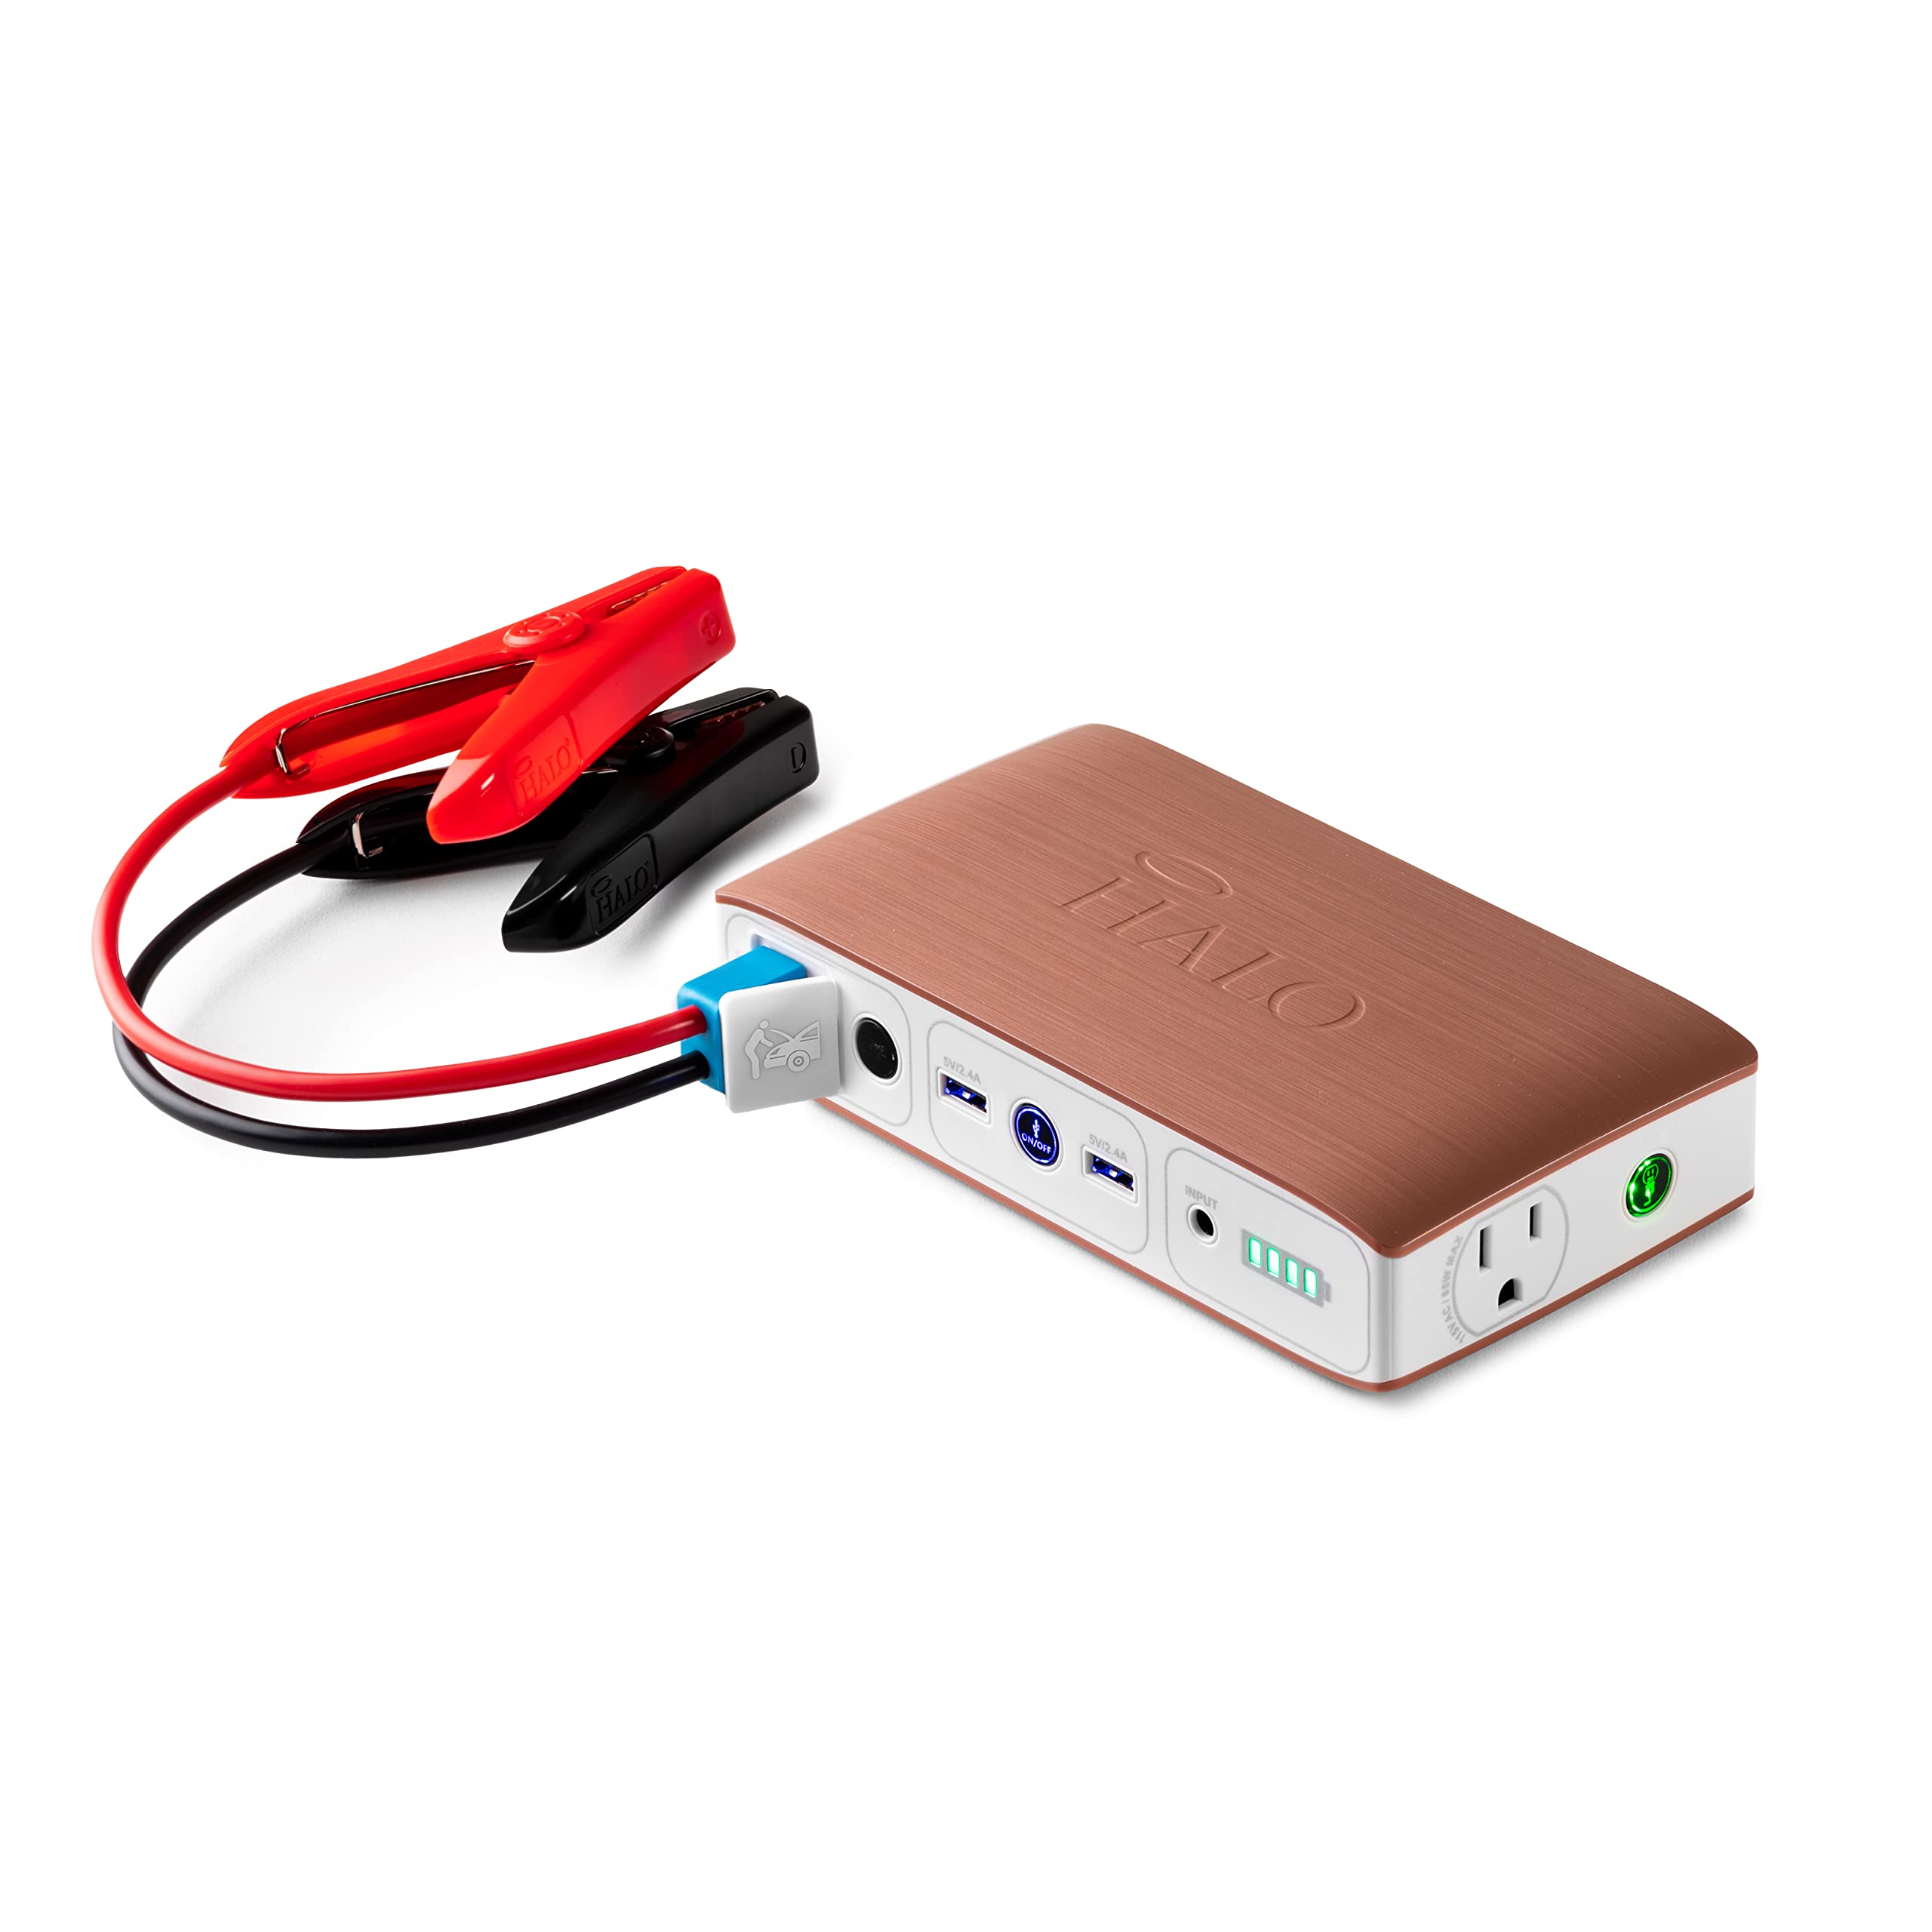 HALO Usb Bolt 58830 mWh Portable Phone Laptop Charger Car Jump Starter with AC Outlet and Car Charger - Rose Gold